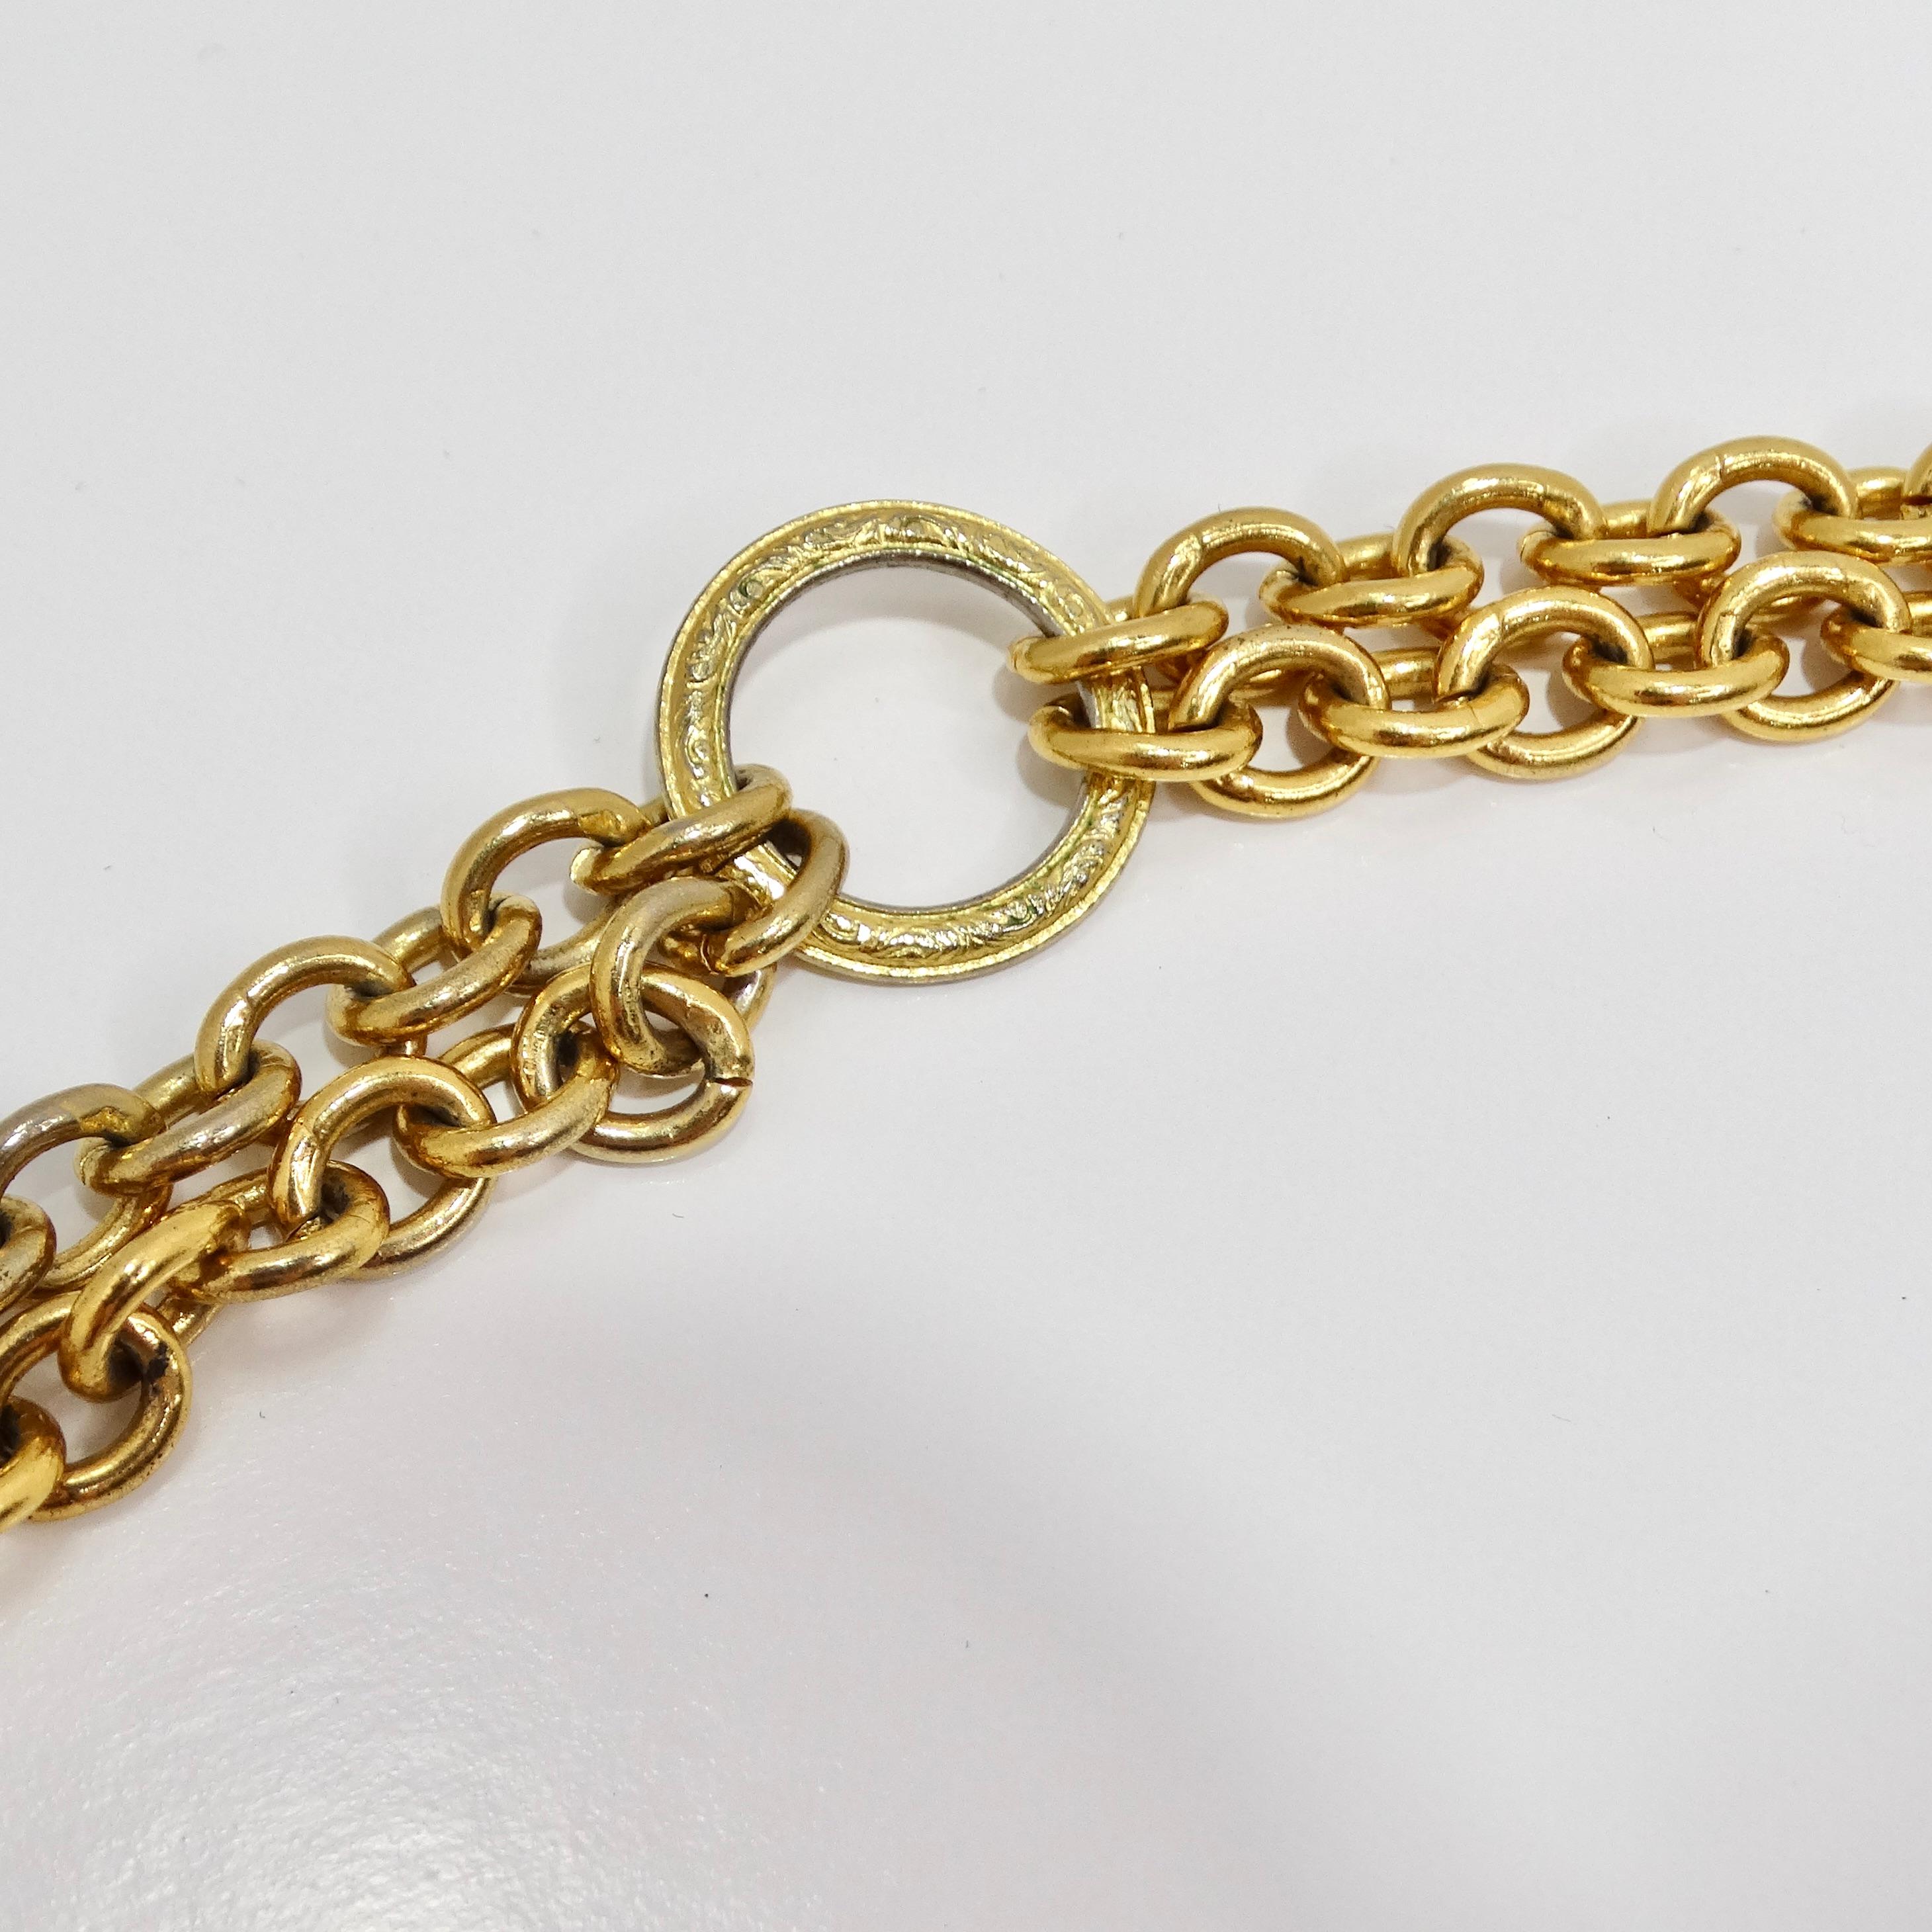 Women's or Men's Chanel 1980s Gold Tone Flap Bag Necklace For Sale